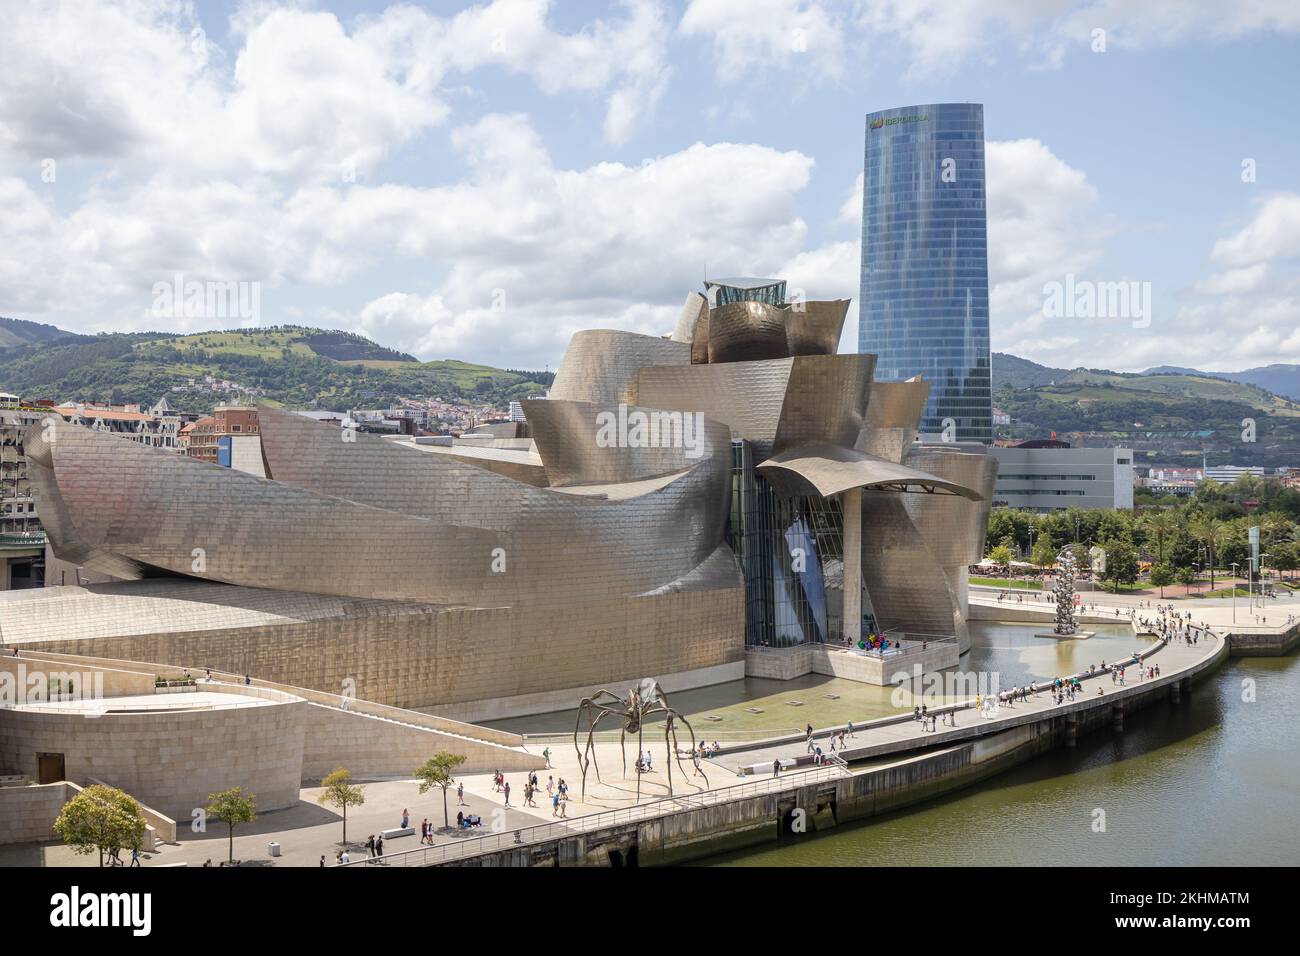 BILBAO, SPAIN-AUGUST 7, 2021: Guggenheim Museum Bilbao building by architect Frank Gehry in Bilbao, Basque Country, Spain. Stock Photo